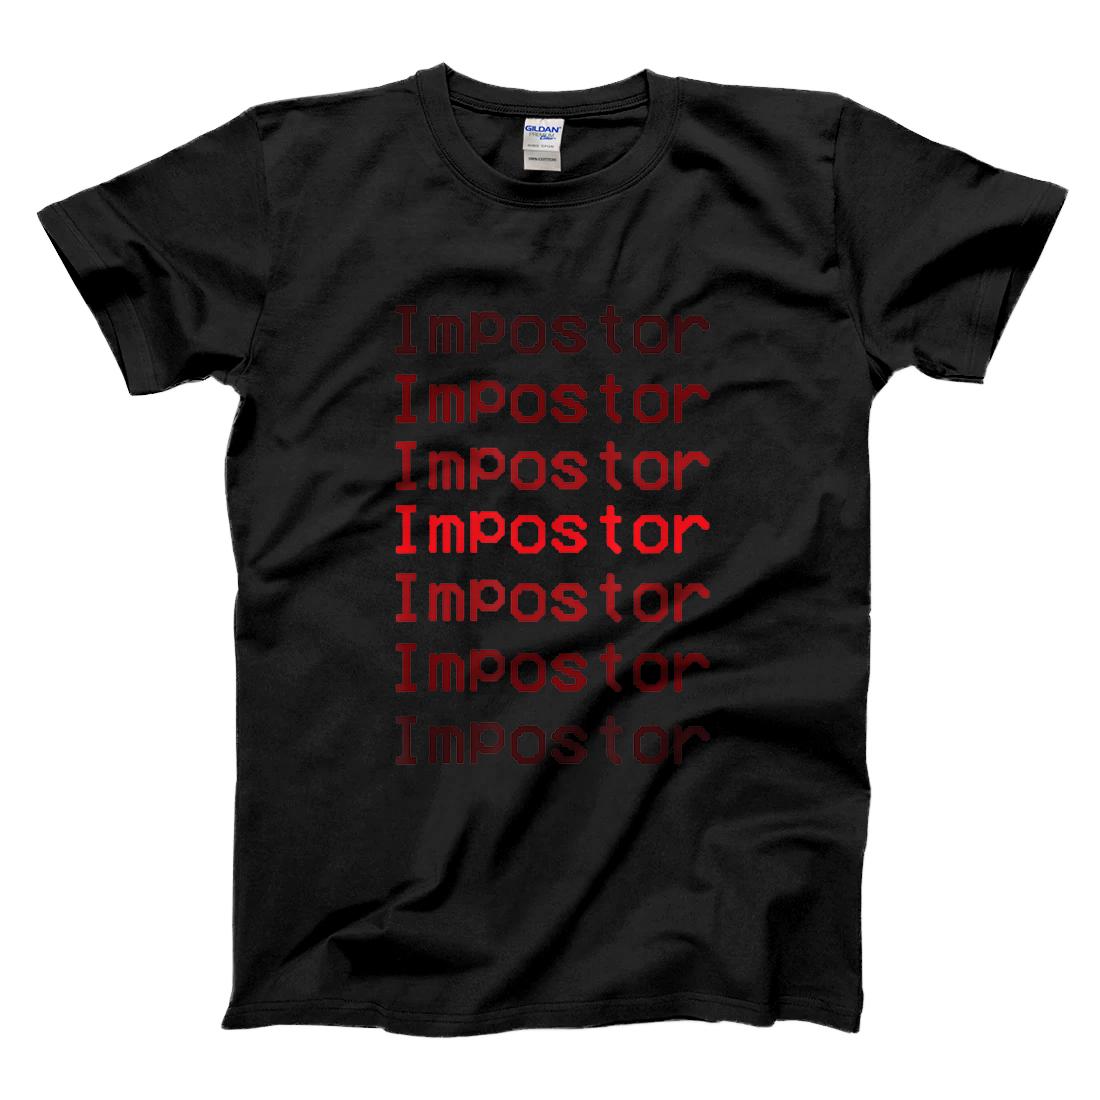 Personalized Imposter Player of the Crew T-Shirt